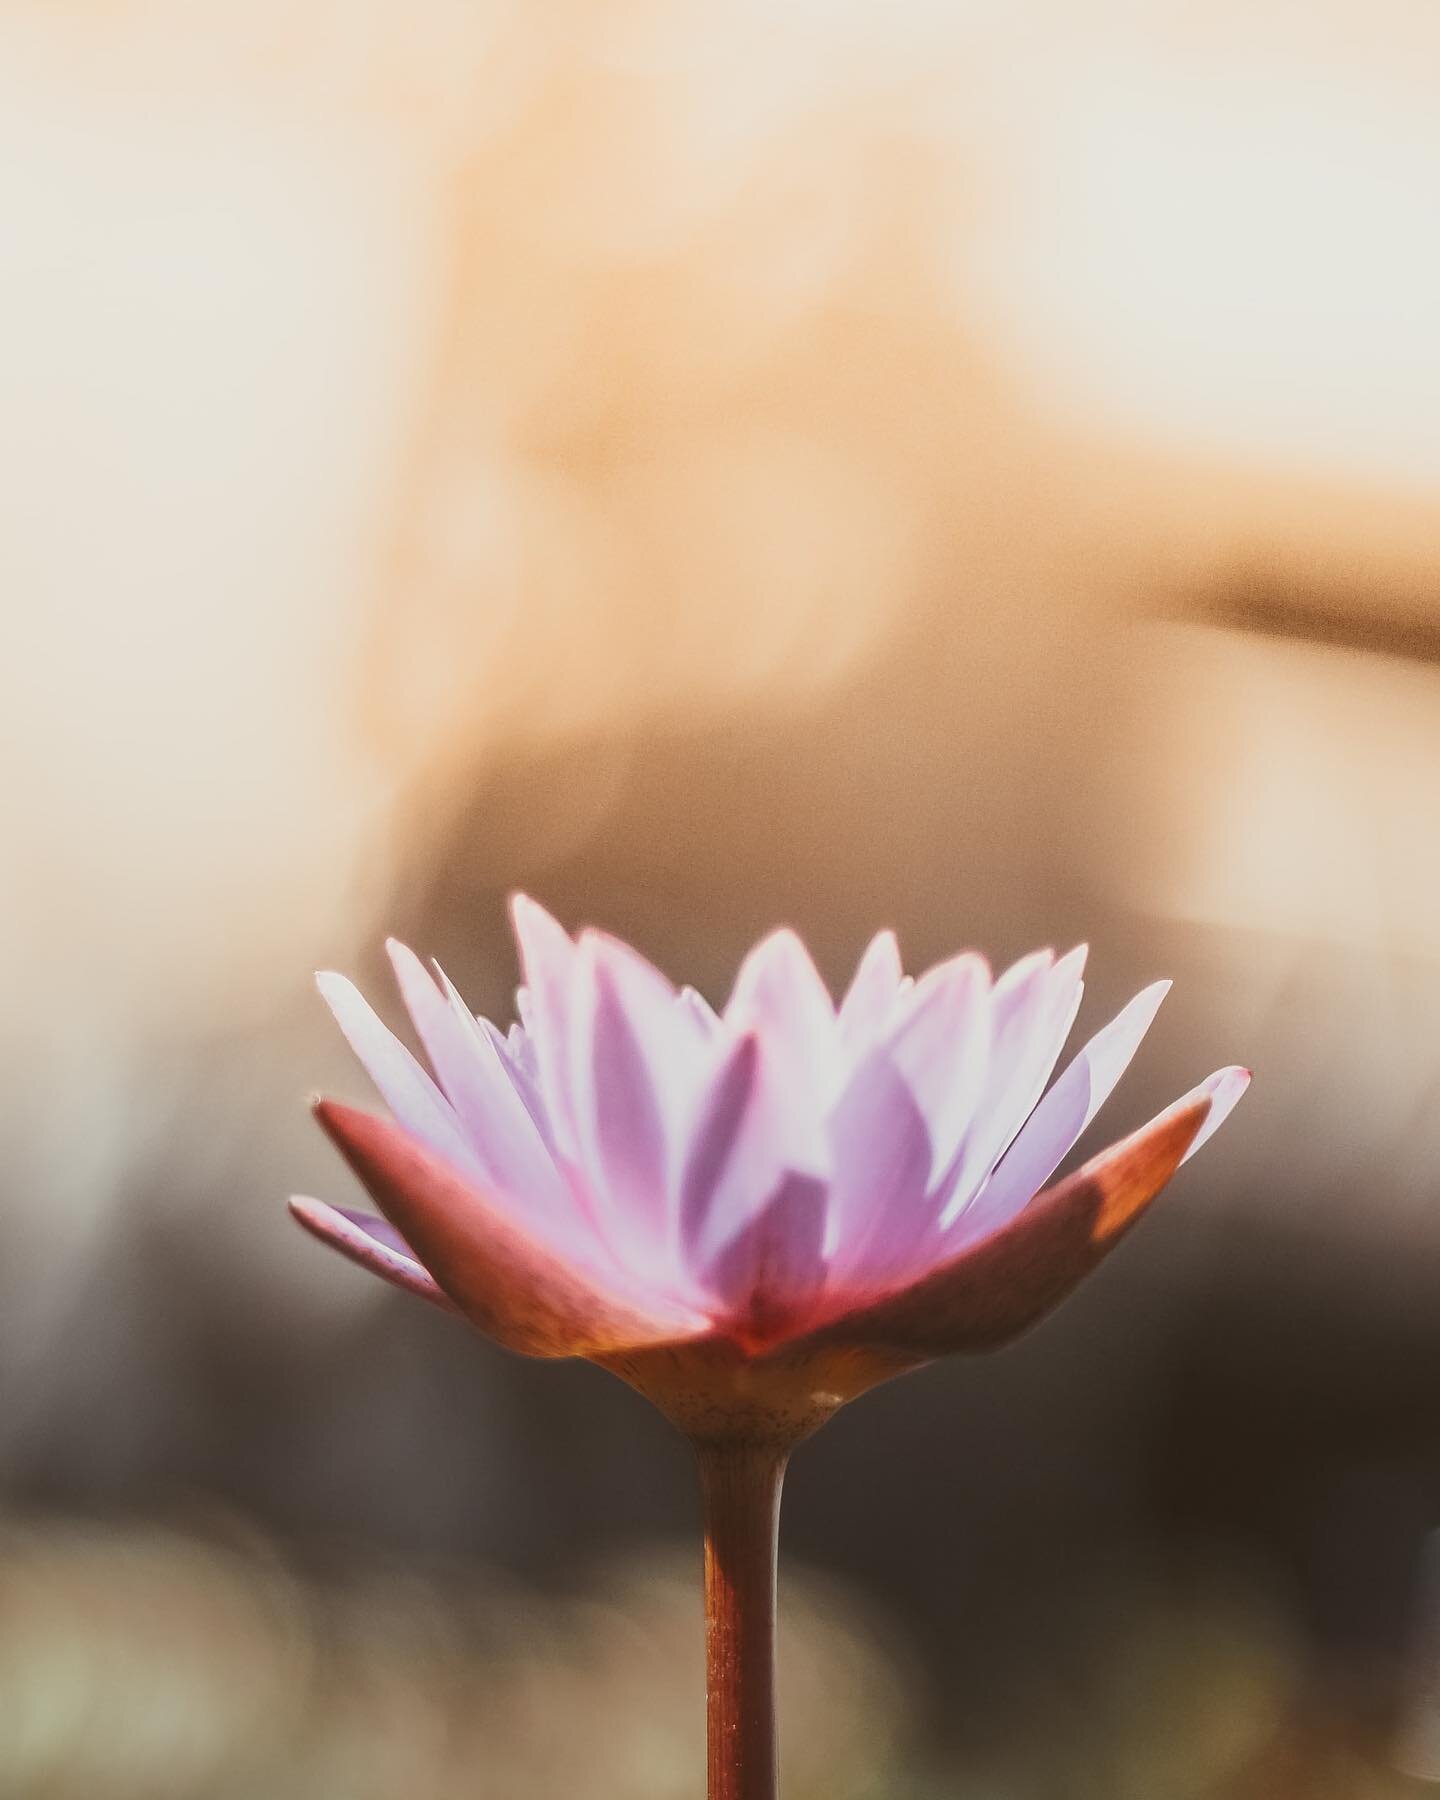 &ldquo;The lotus flower blooms most beautifully from the deepest and thickest mud.&rdquo; &ndash; Buddhist Proverb 
.
.
.
.
#lotusflower #lotus #lotusflowers #holistichealing #healing #spirituality #spiritual #healing